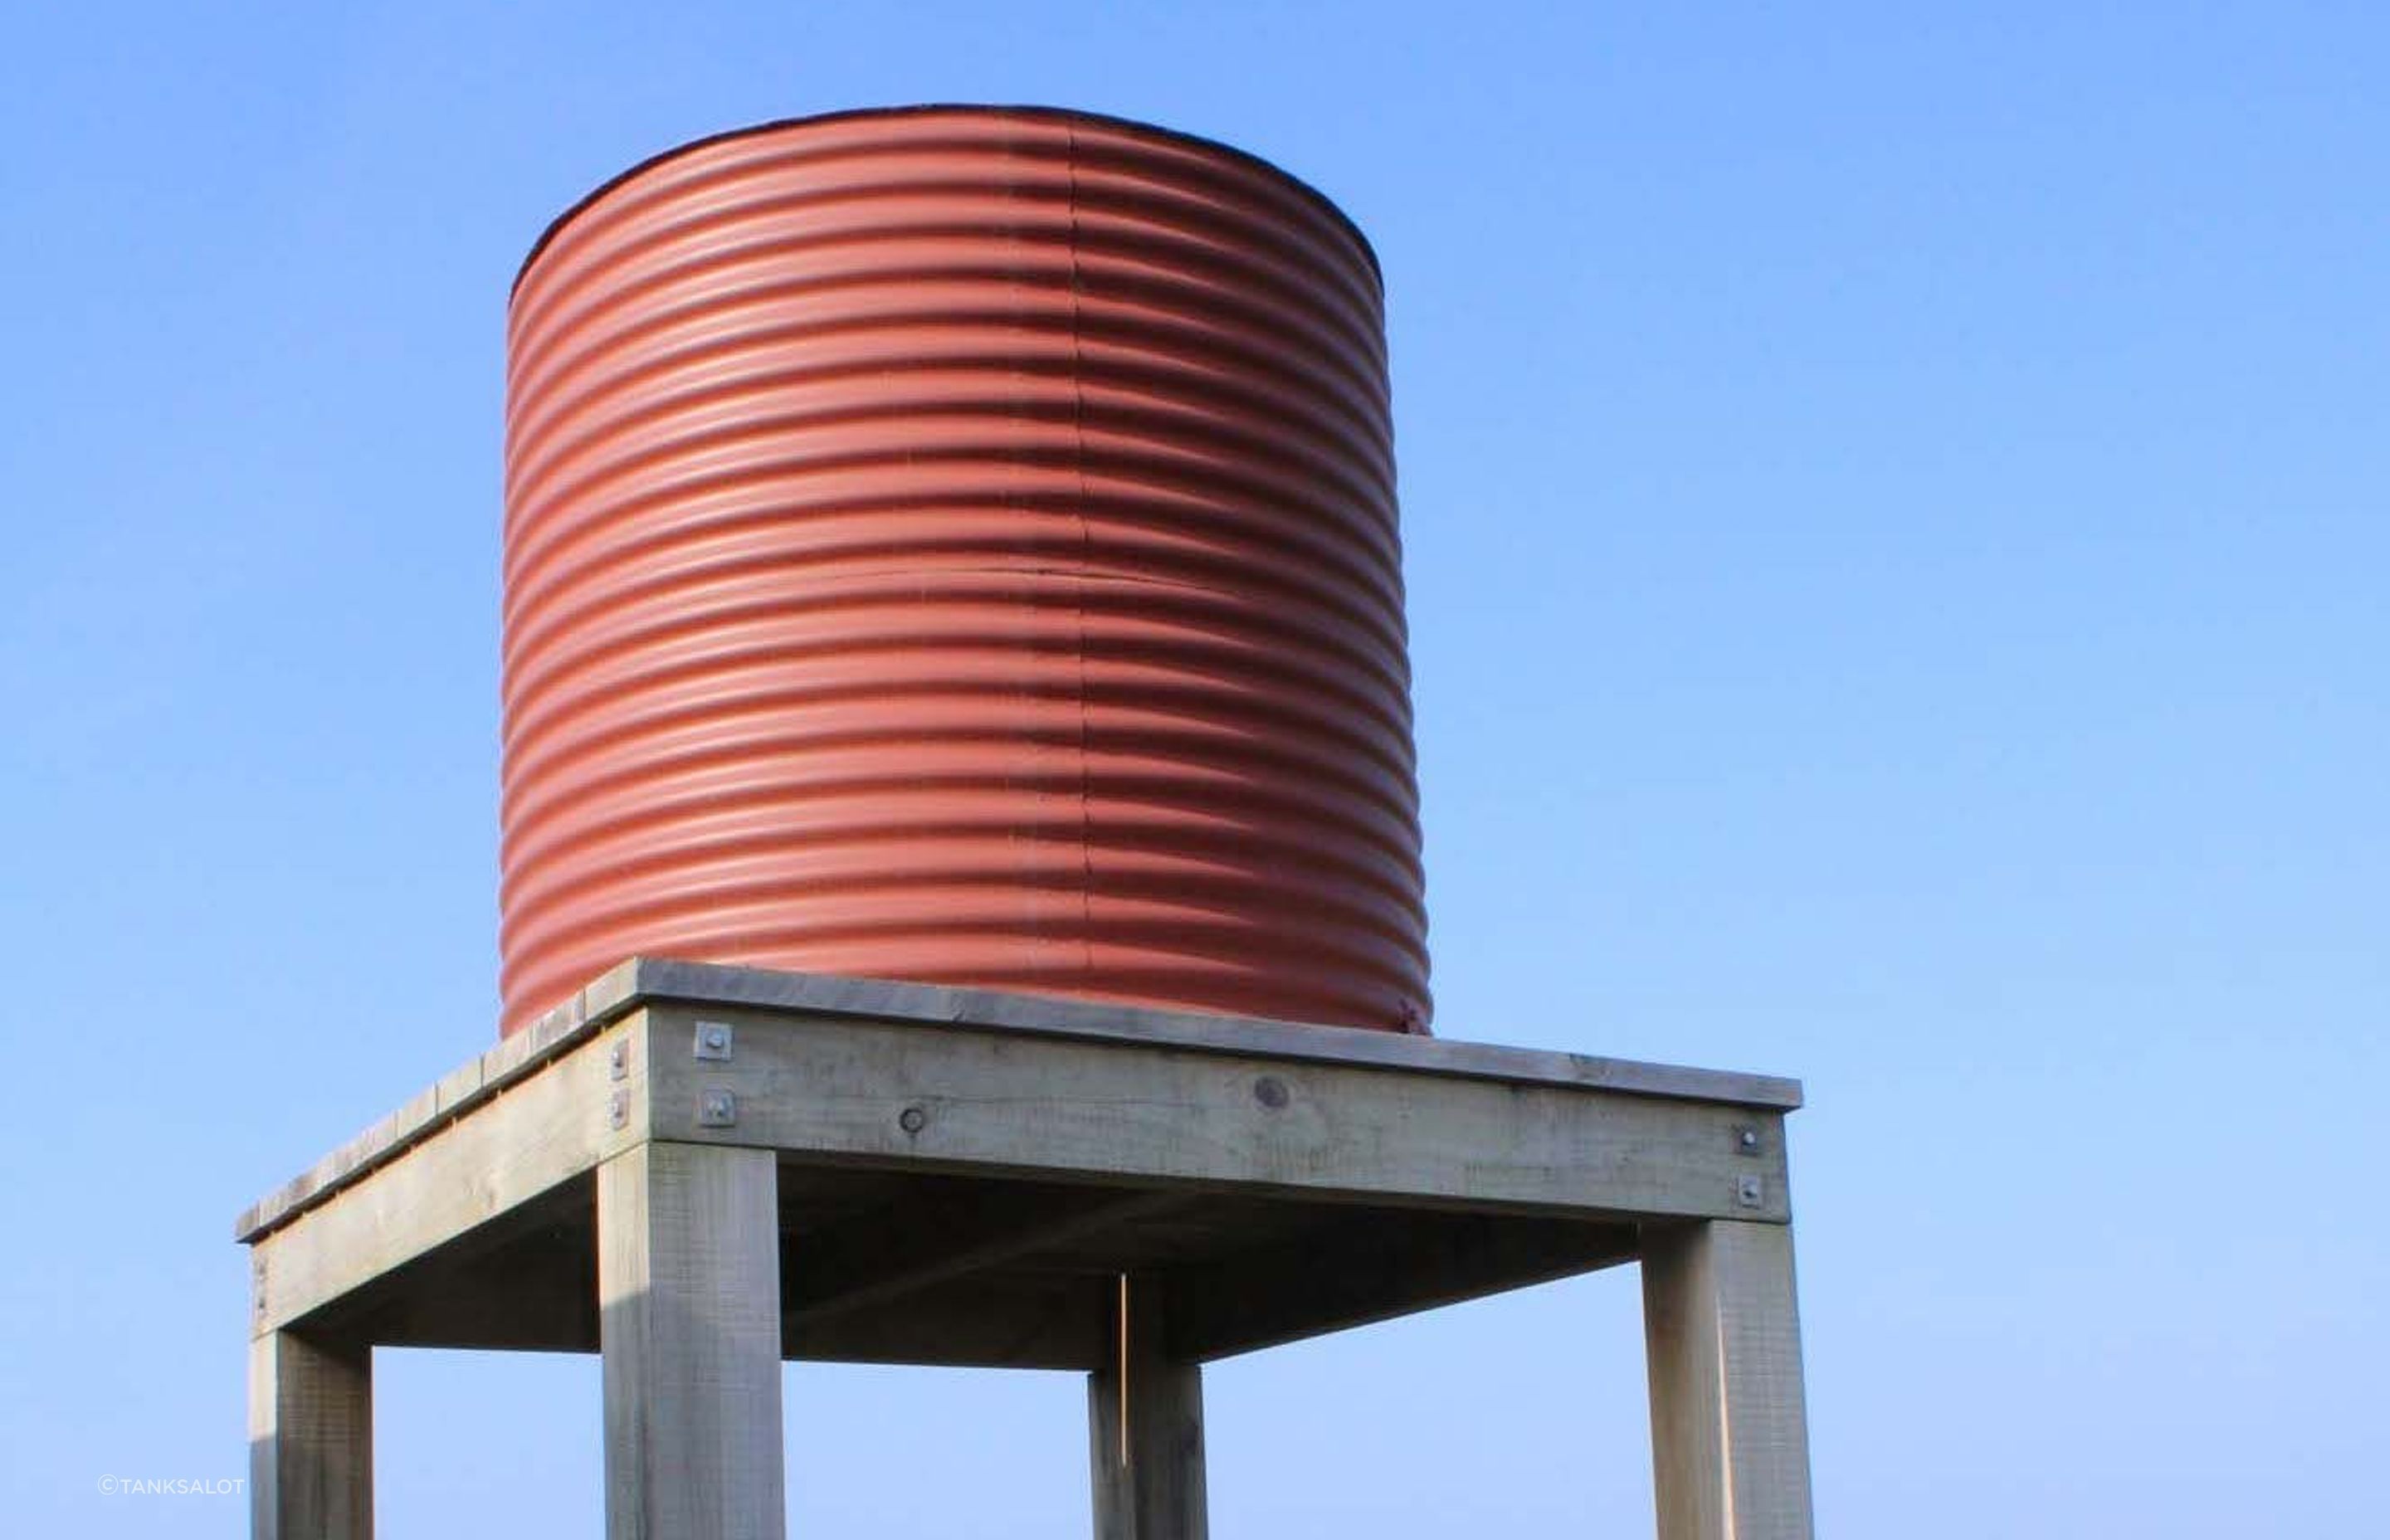 Water tanks, like this stainless steel model from Tanksalot, can provide all the water storage needed off-grid.